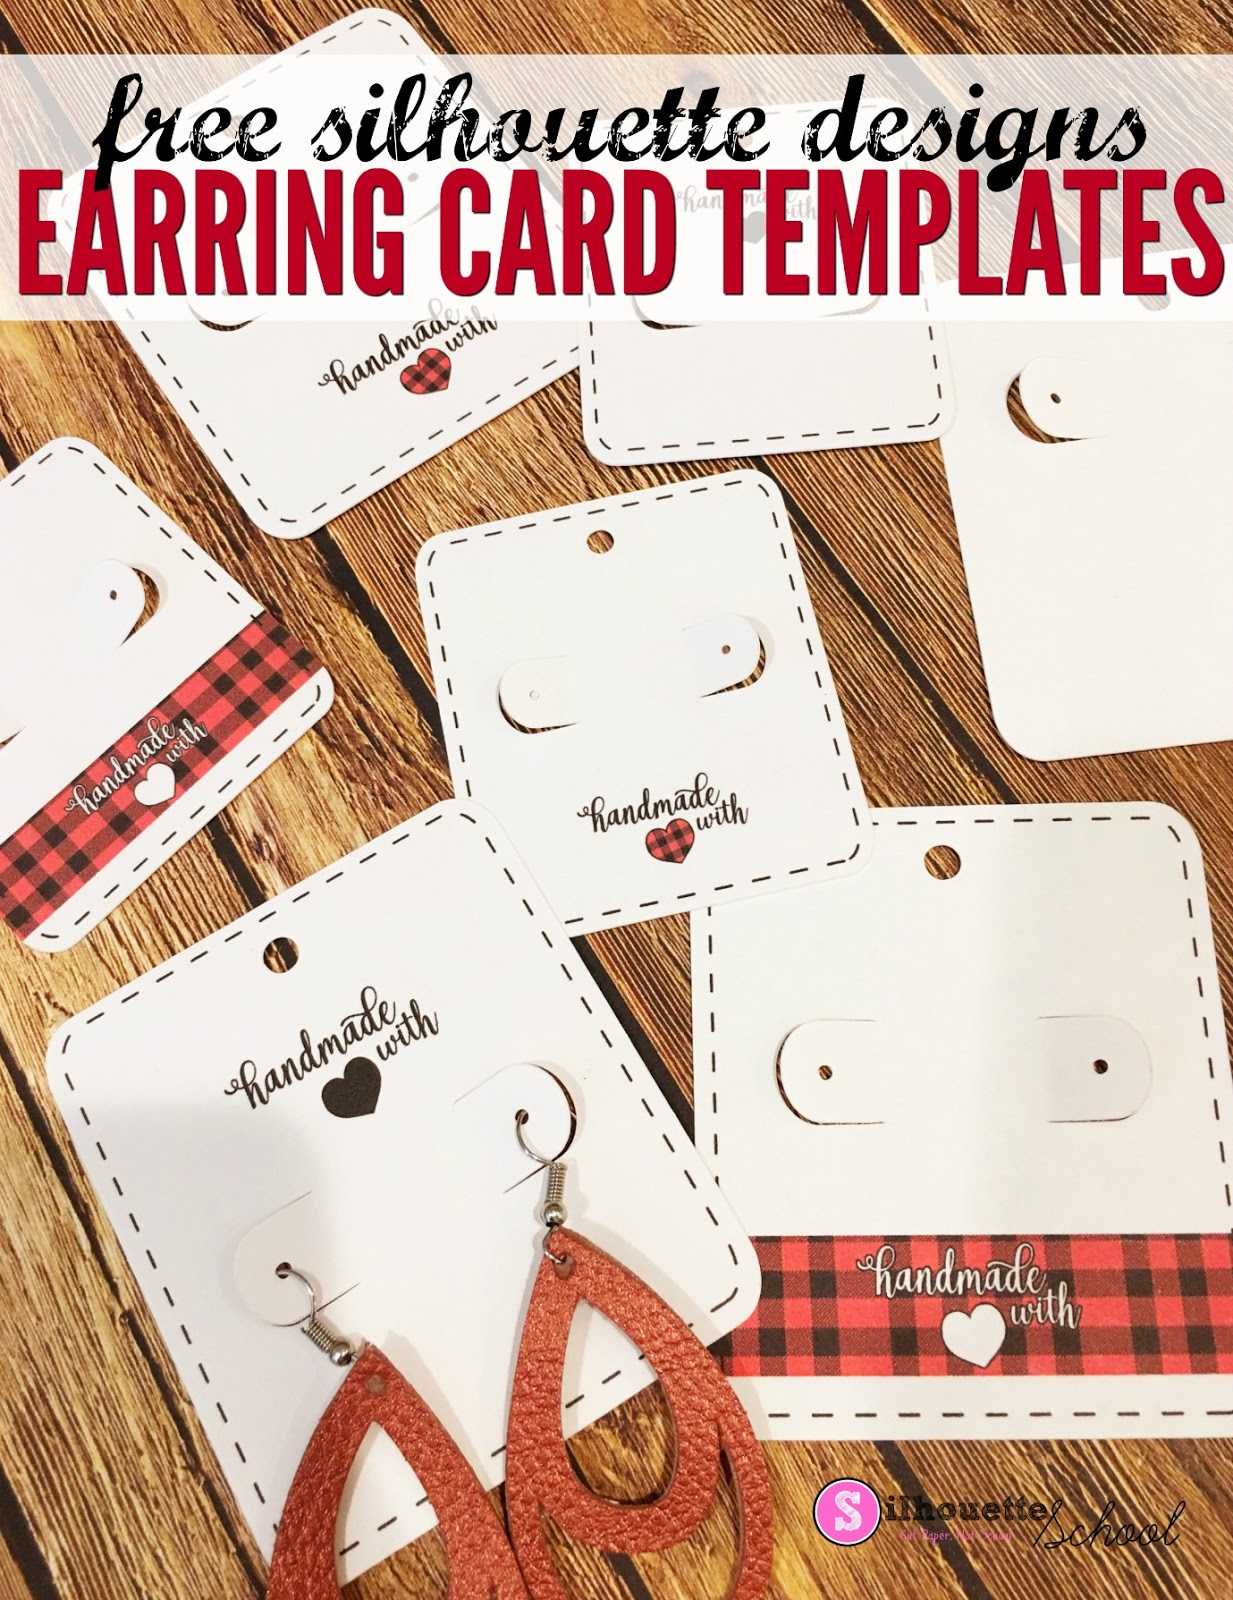 Free Silhouette Earring Card Templates (Set Of 8 Intended For Silhouette Cameo Card Templates